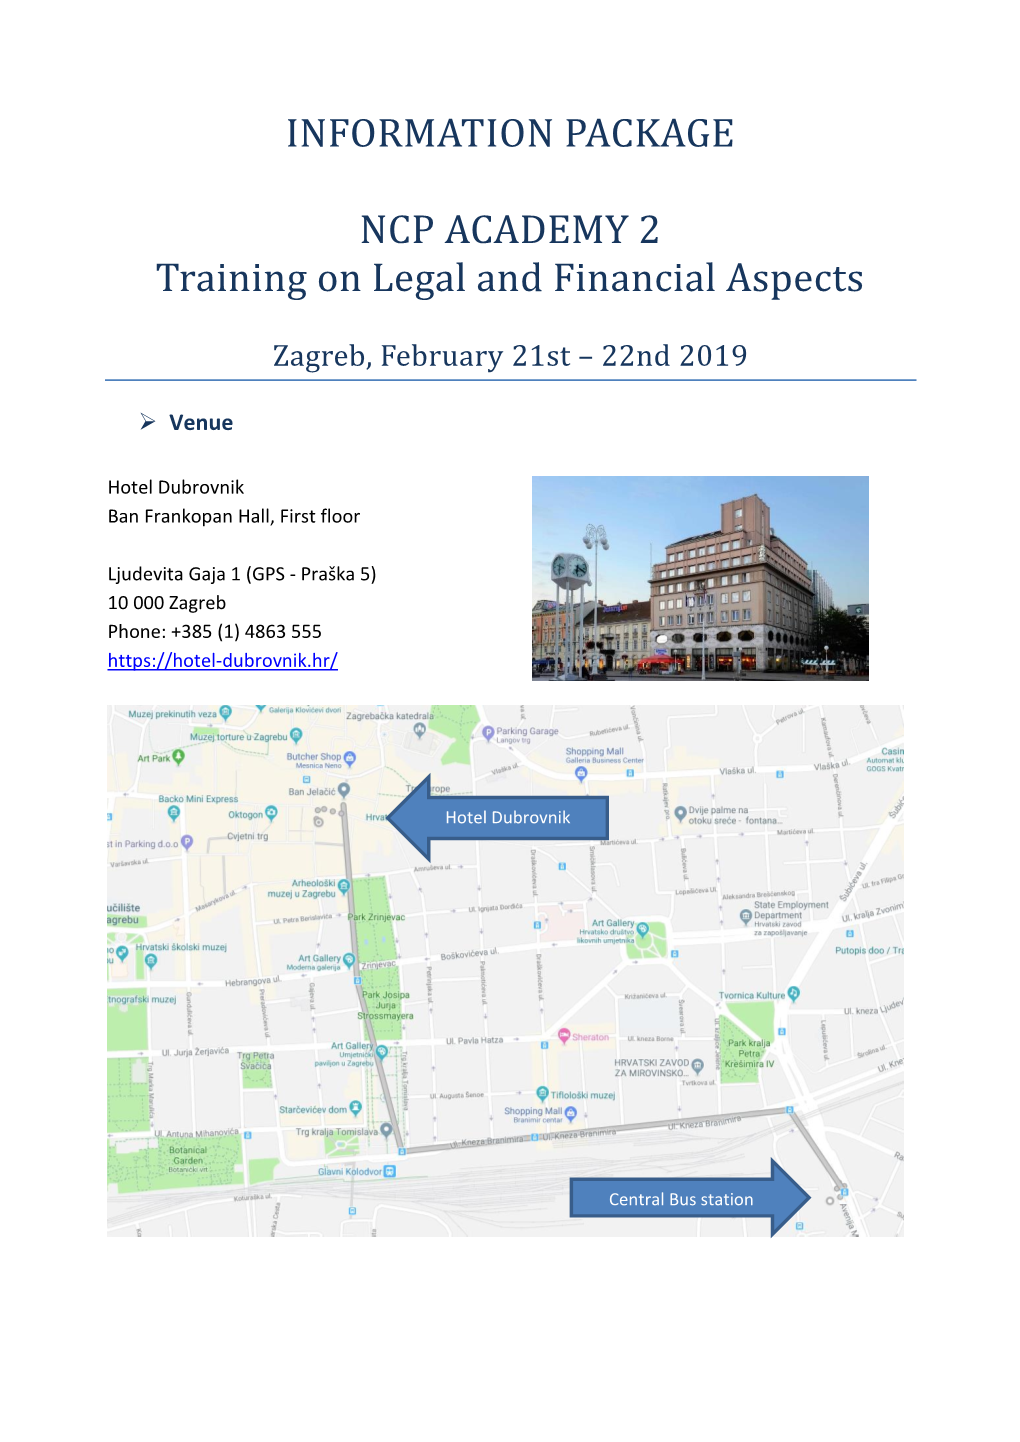 INFORMATION PACKAGE NCP ACADEMY 2 Training on Legal And